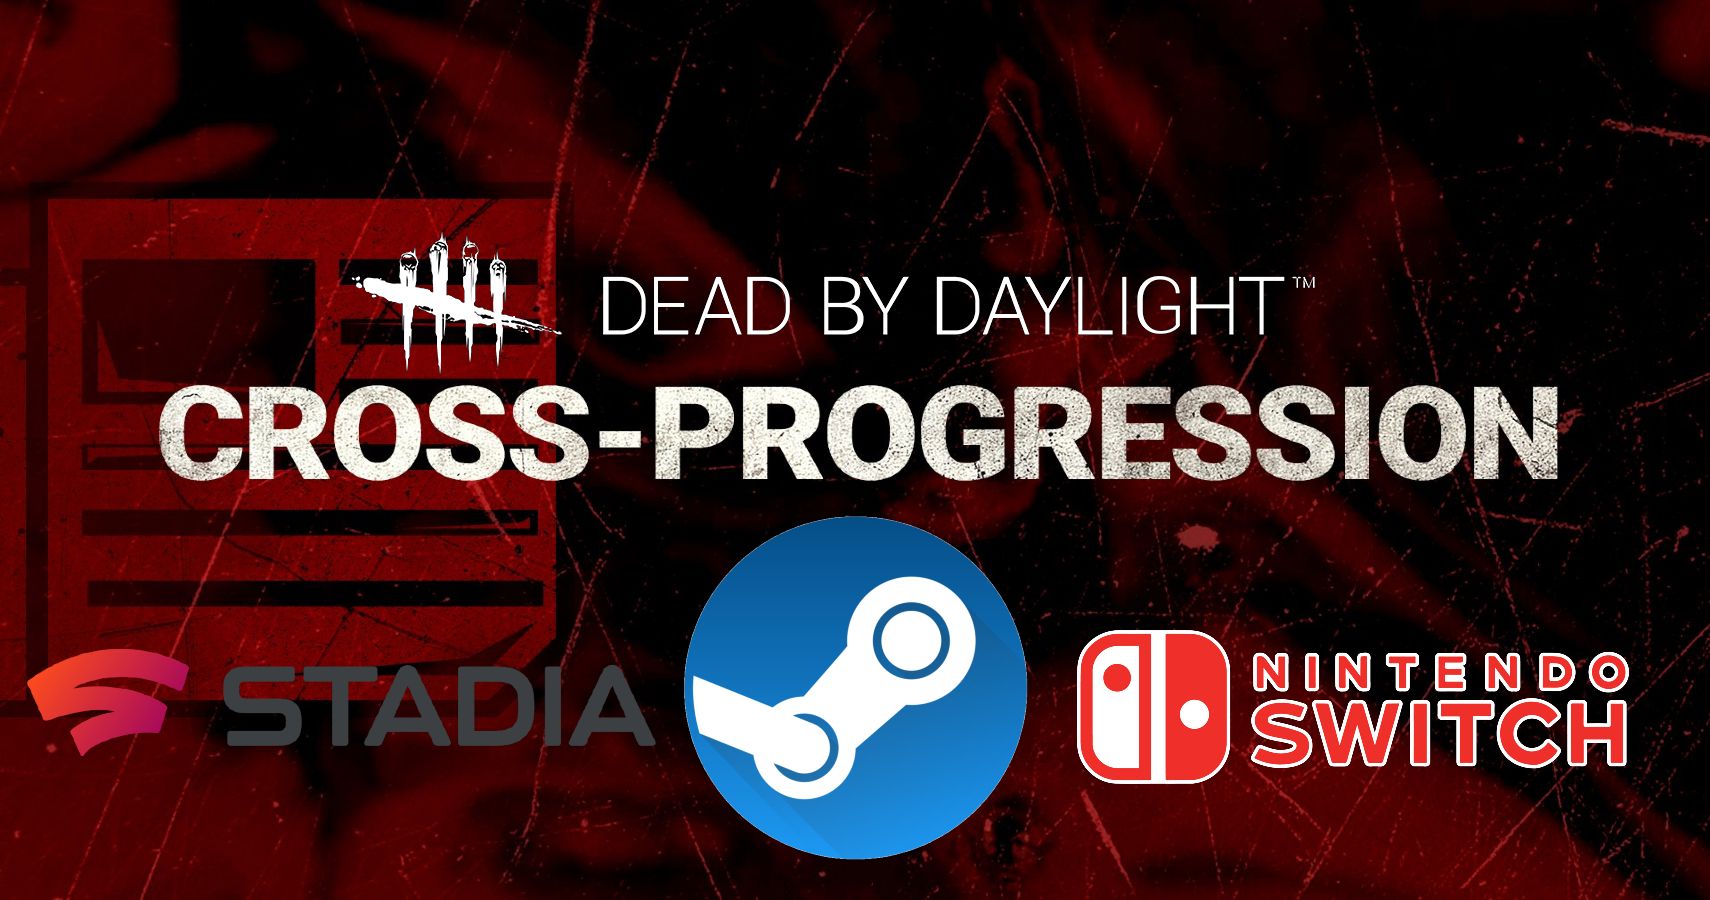 CrossProgression Is Coming Soon To Dead By Daylight